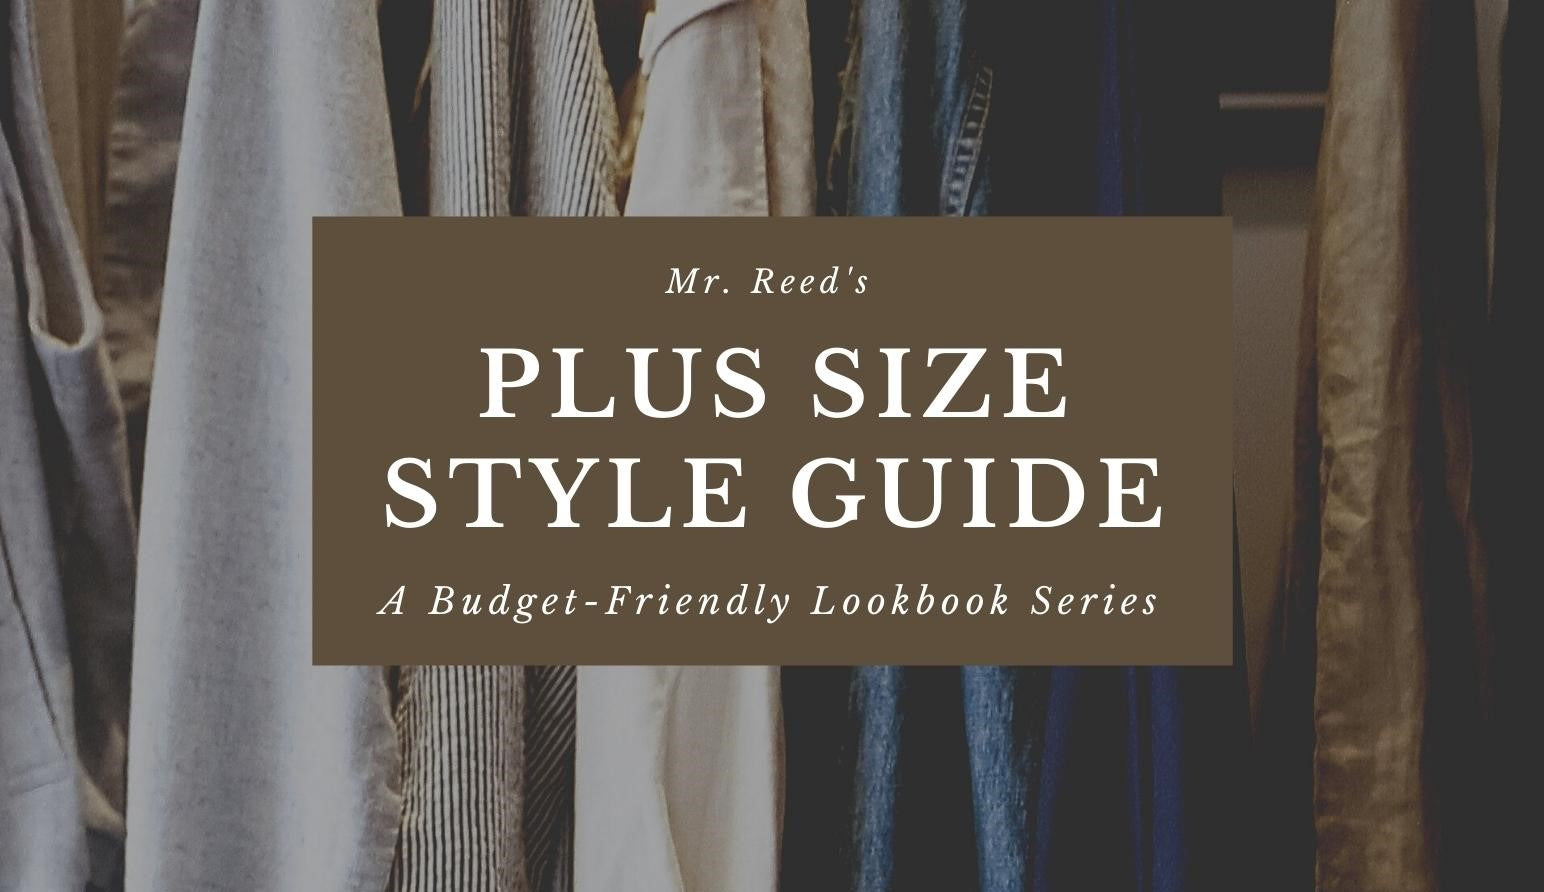 Mr. Reed's Plus Size Style Guide – Made By Mr. Reed